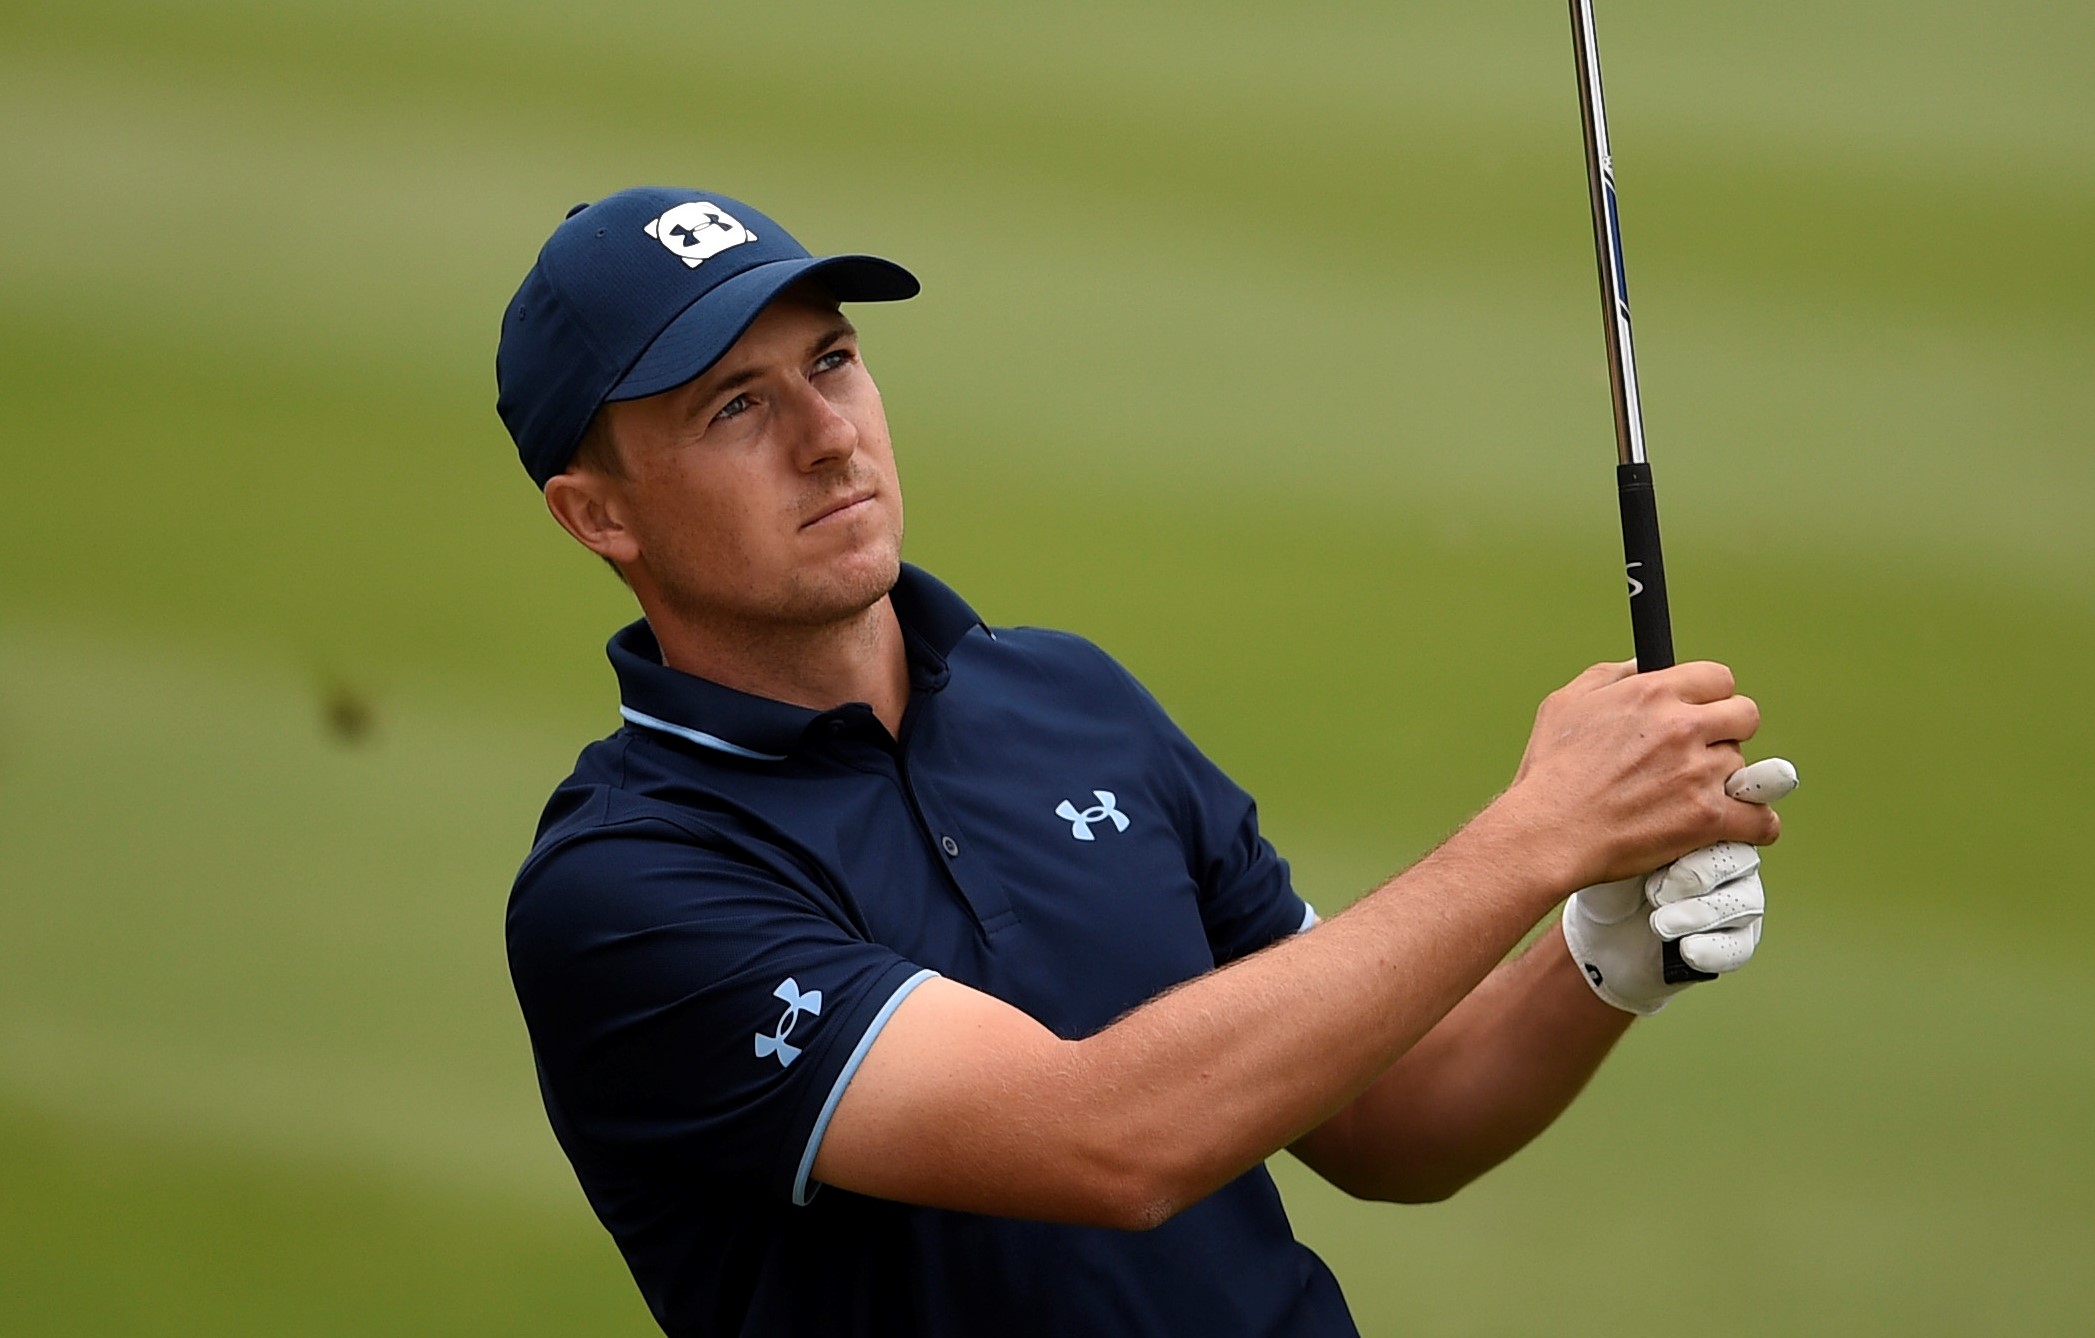 WATCH: Jordan Spieth hits the SHOT on the PGA Tour this year! |